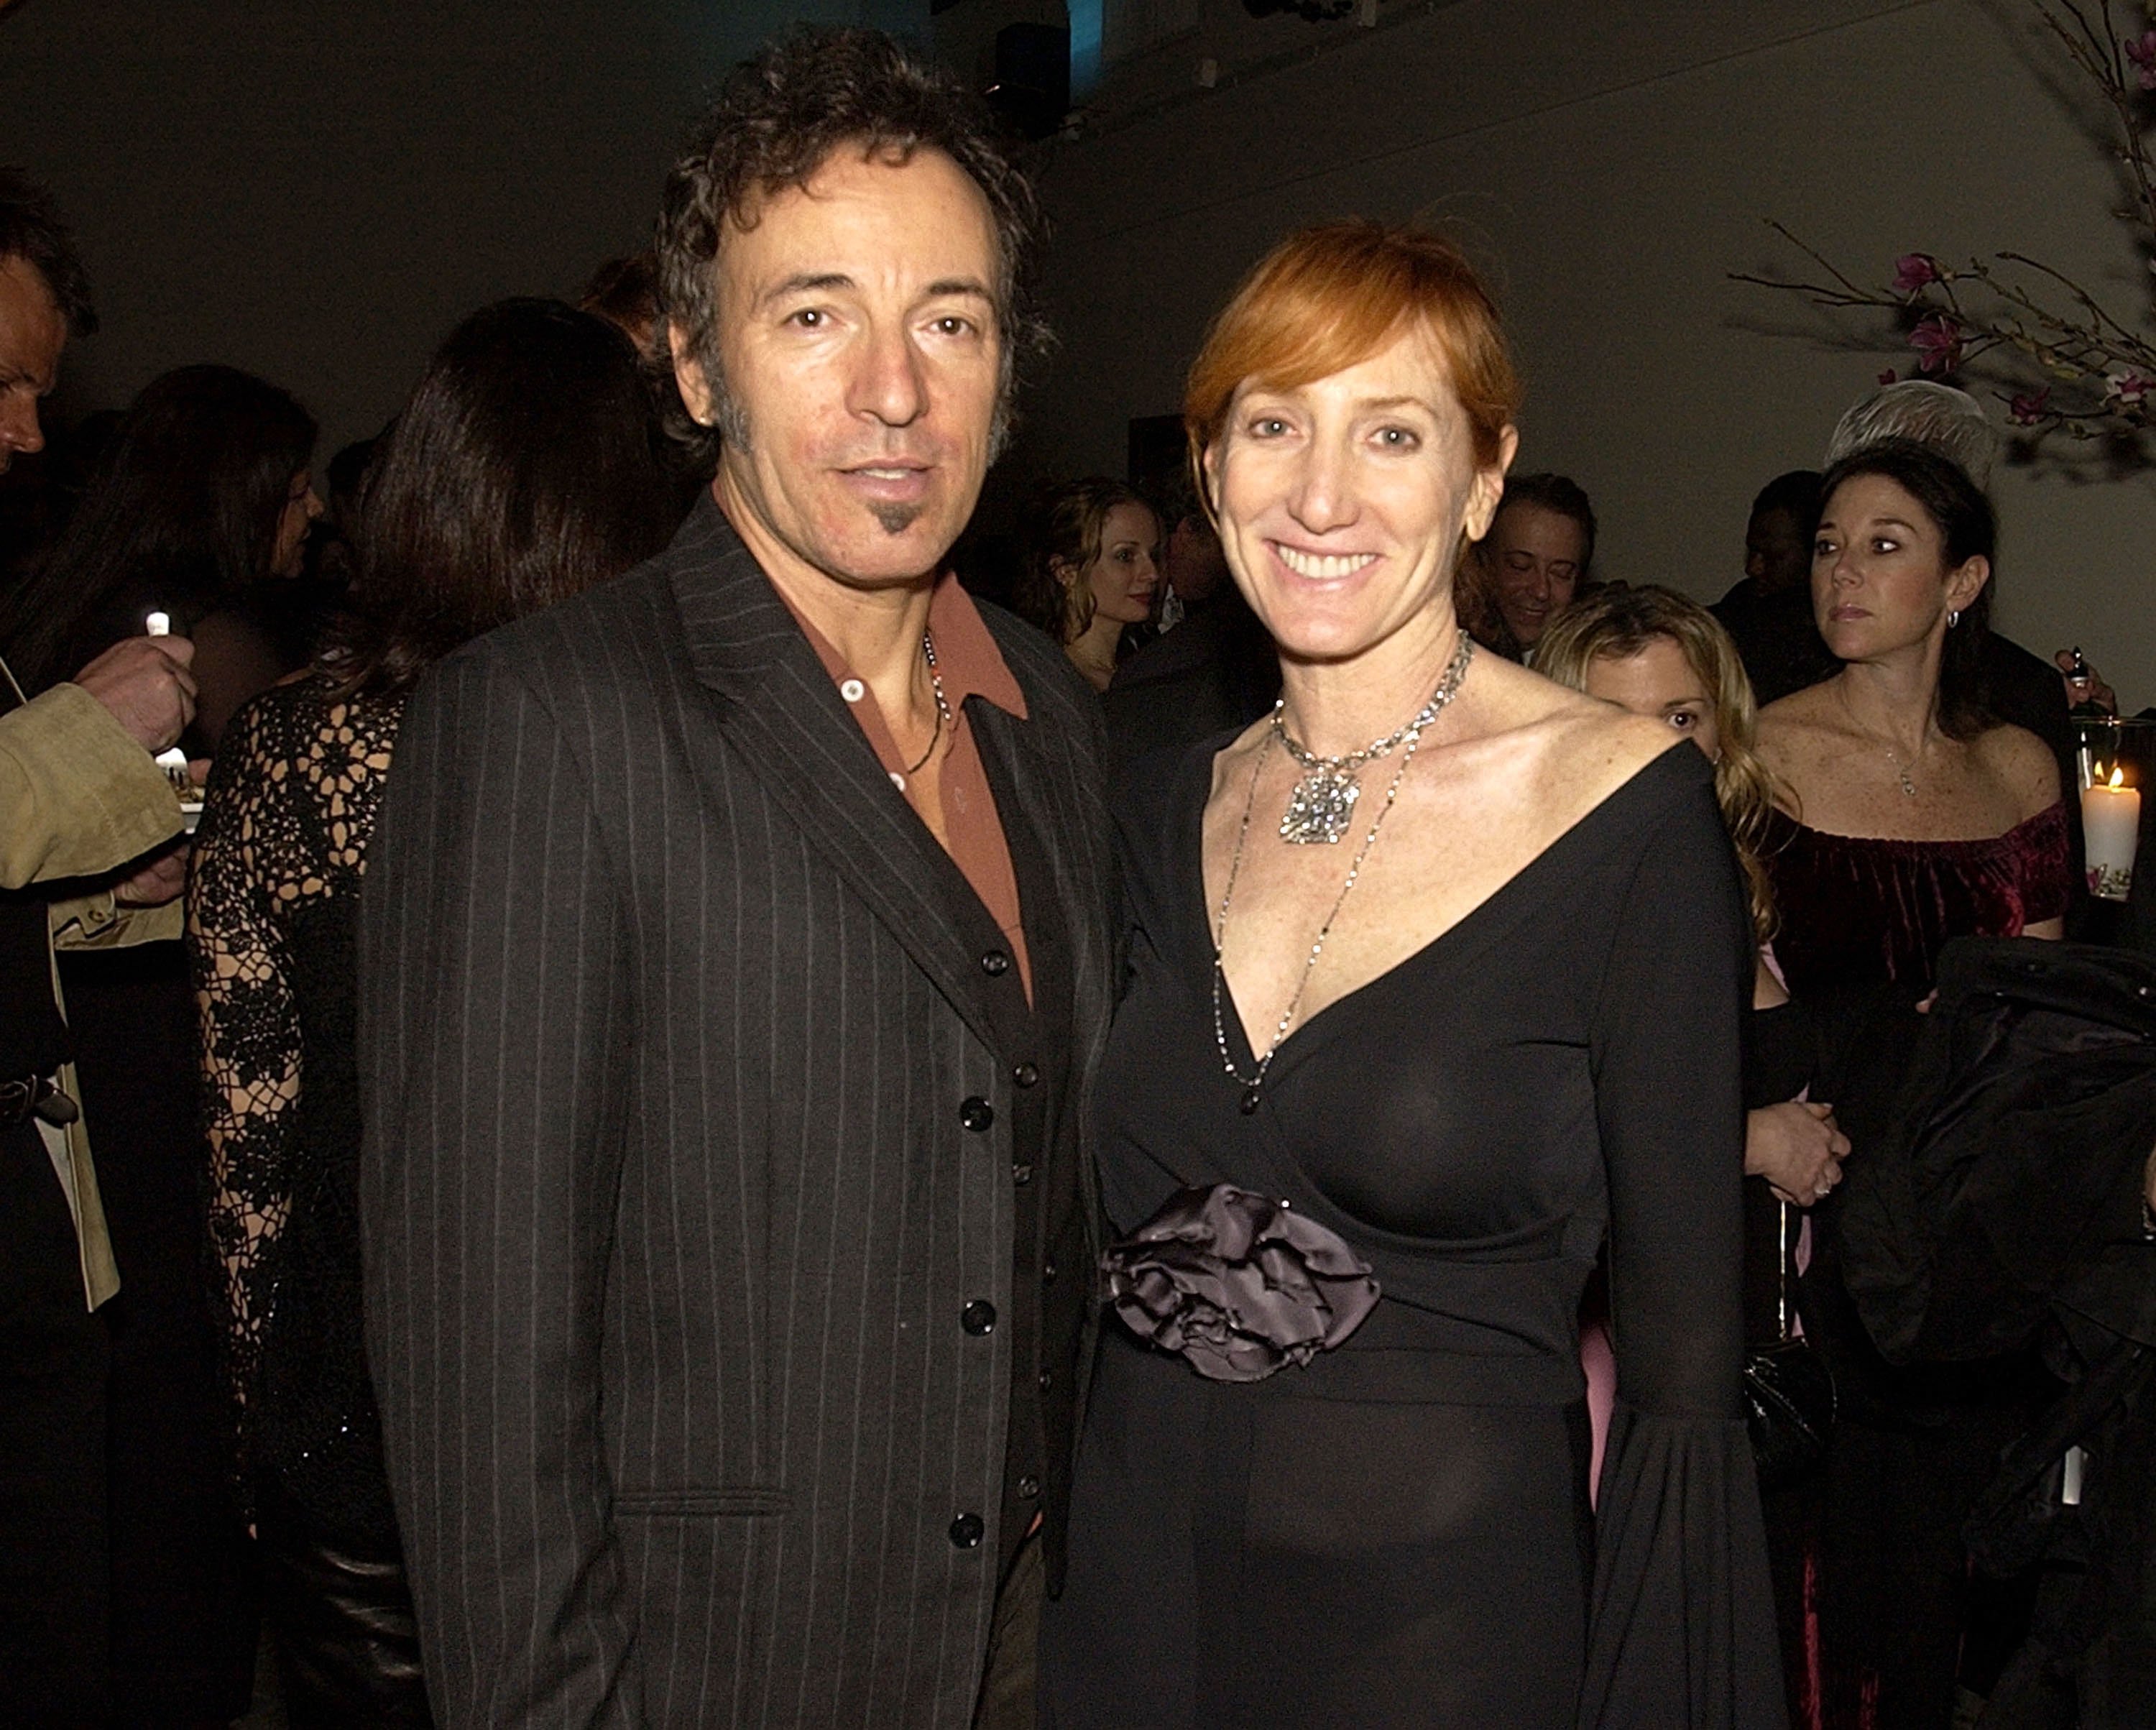 Bruce Springsteen and wife Patti Scialfa at the Kristen Carr Benefit held at Bridgewater in New York, NY, USA.  |  Source: Getty Images